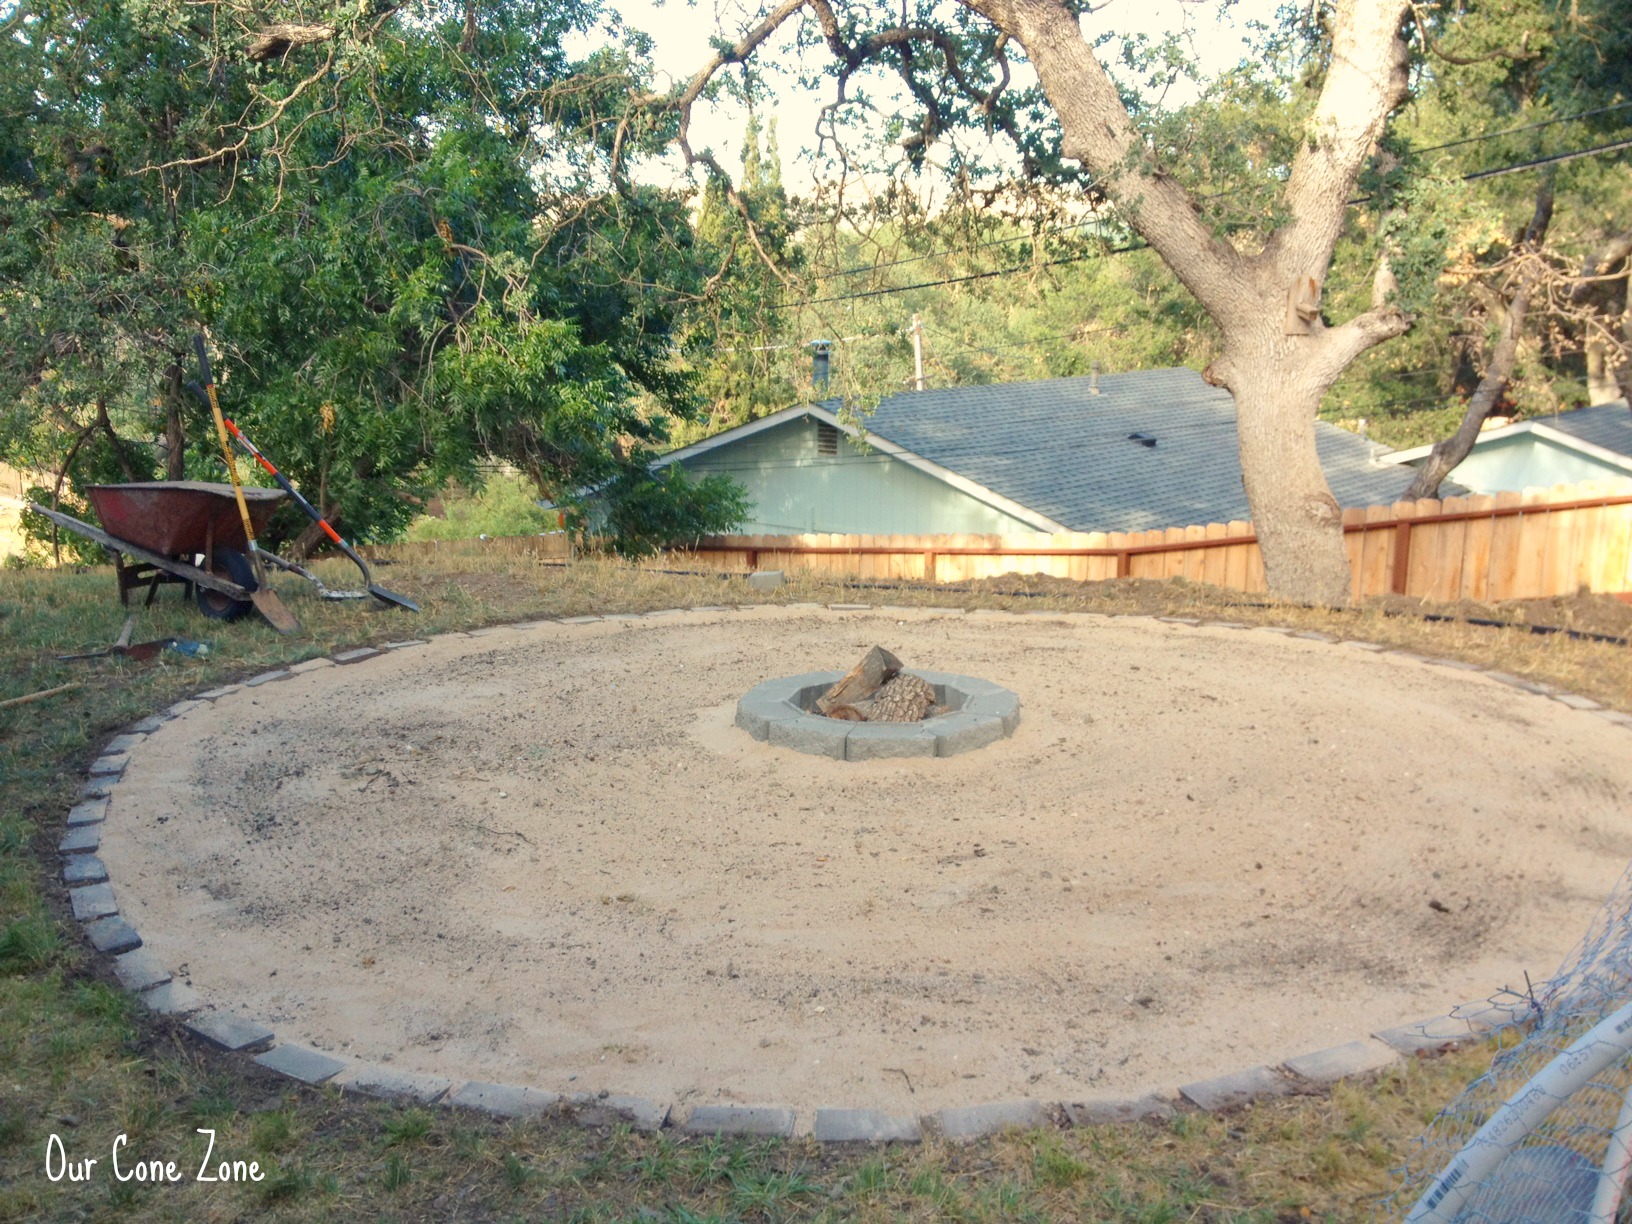 We Made A Fire Pit Our Cone Zone, How To Make A Fire Pit In Sand